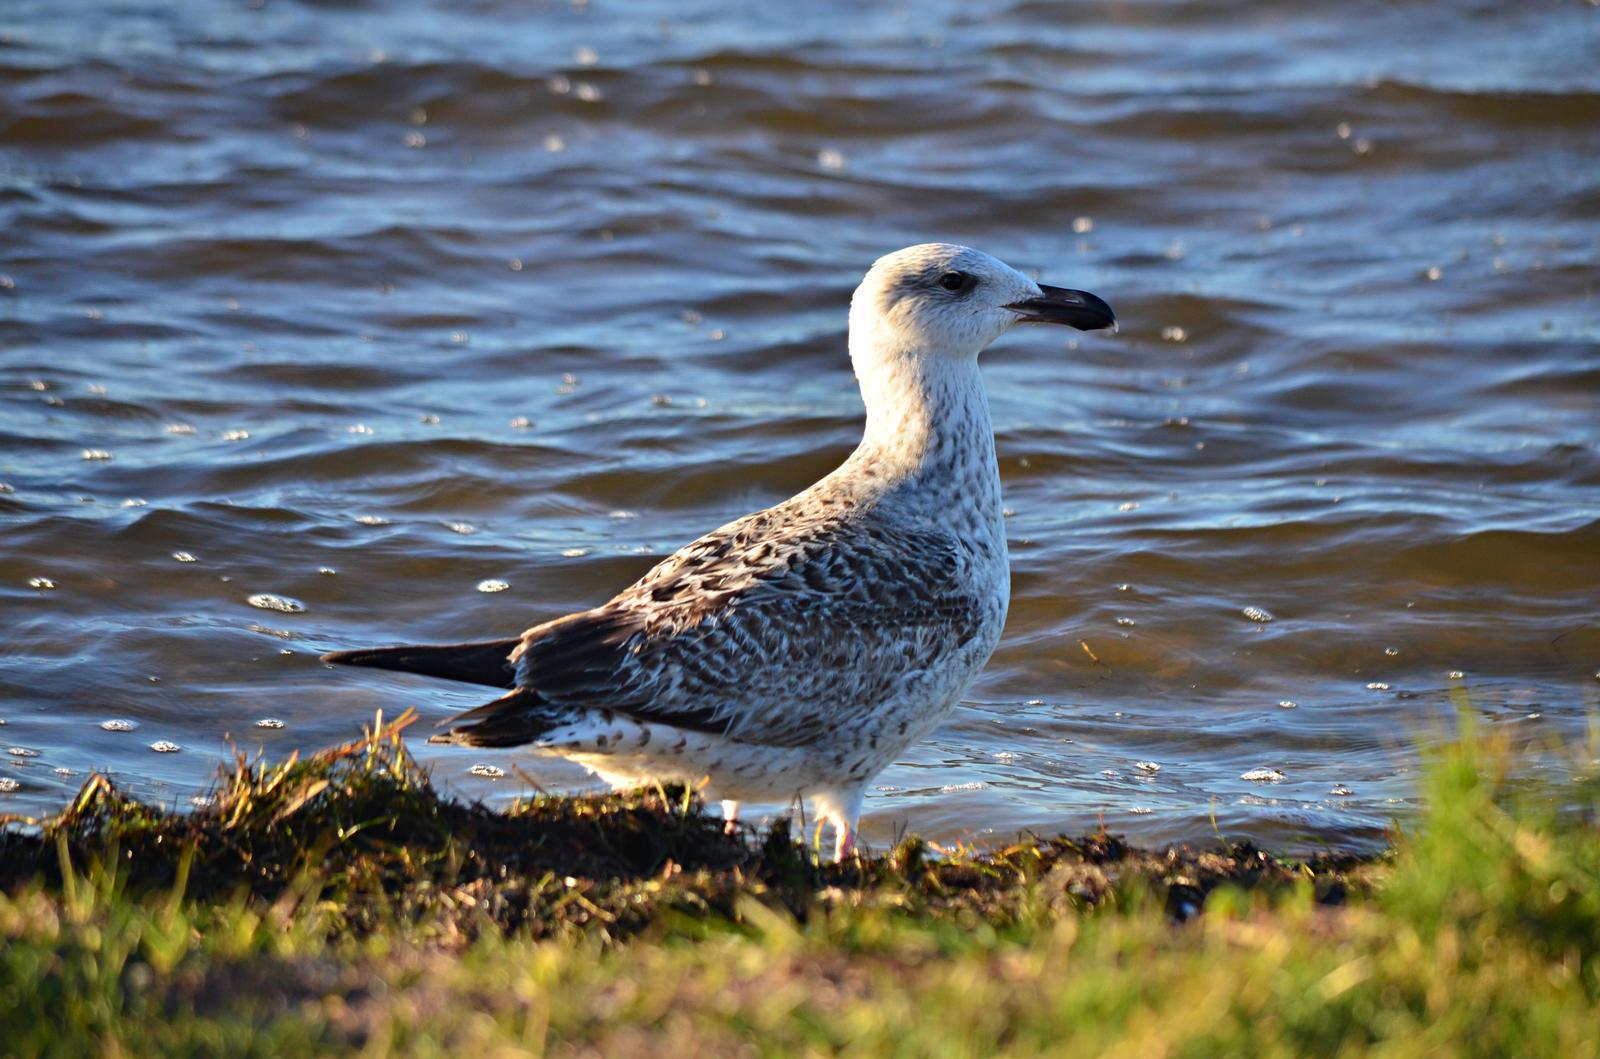 Great Black-backed Gull Photo by Darcy Ruby